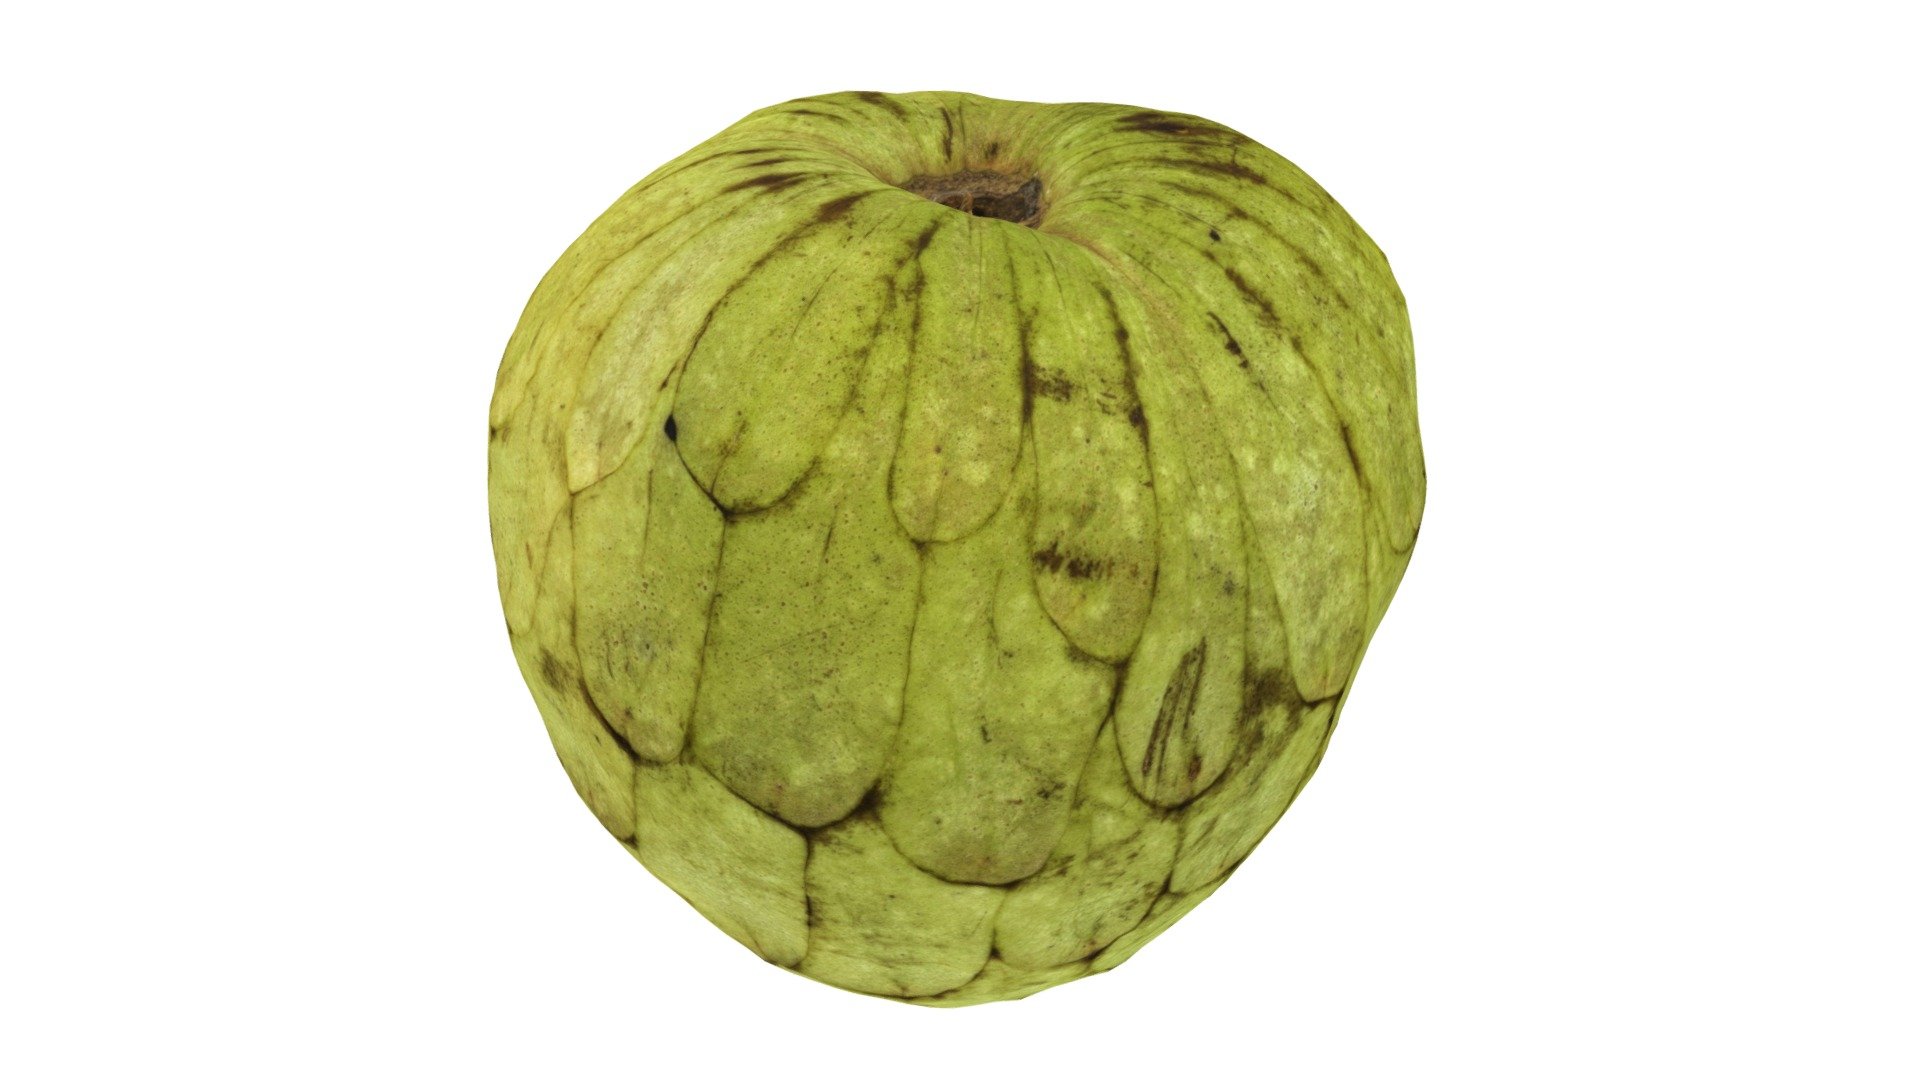 Highly detailed, photorealistic, 3d scanned model of a cherimoya. 8k textures maps, optimized topology and uv unwrapped.

Model shown here is lowpoly with diffuse map only and 4k texture size.

This model is available at www.thecreativecrops.com 3d model